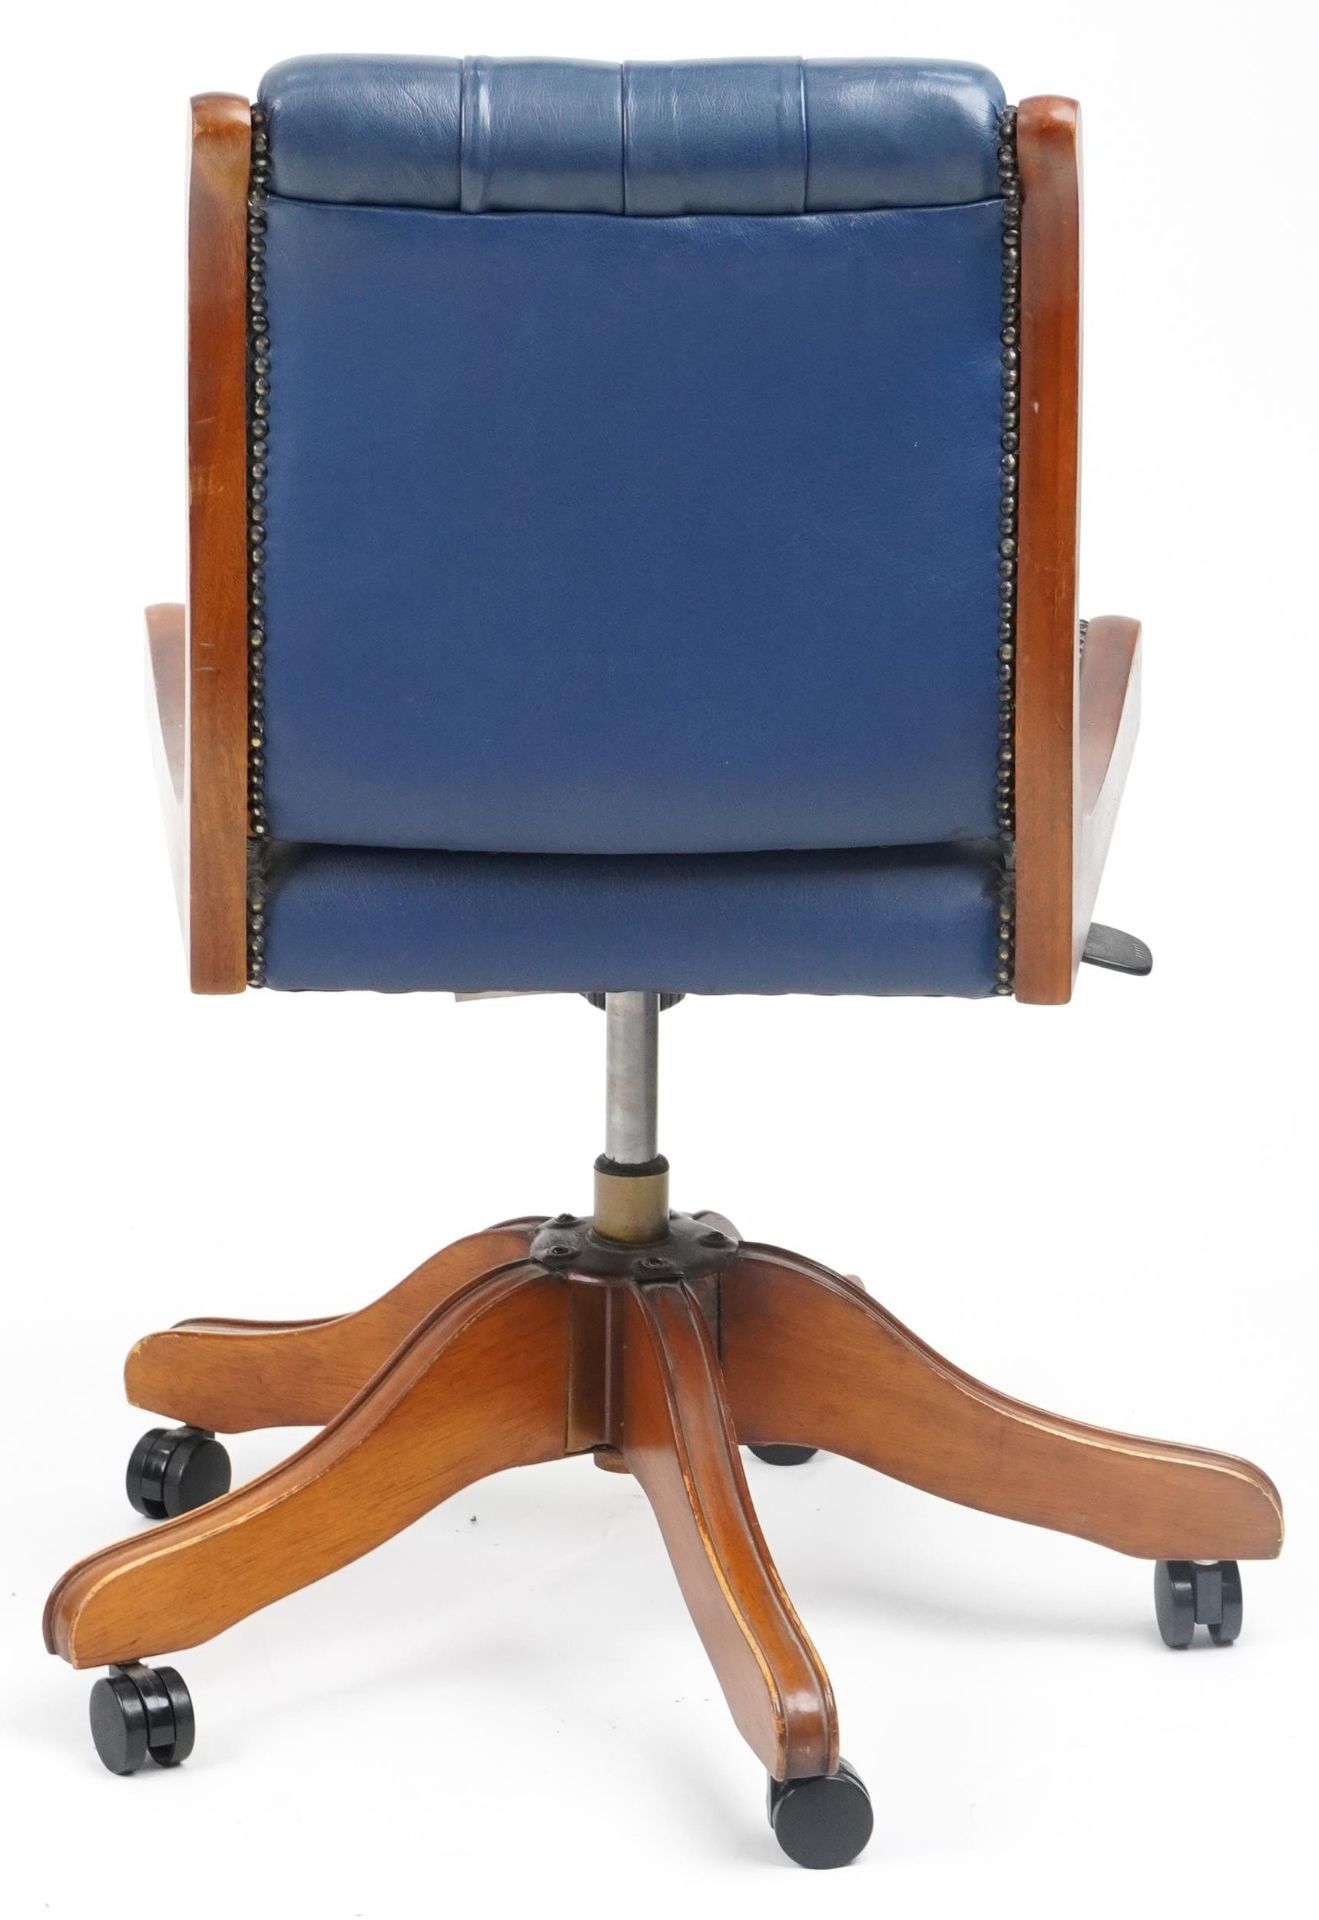 Mahogany and blue leather button back upholstered adjustable desk chair, 89cm high - Image 4 of 4